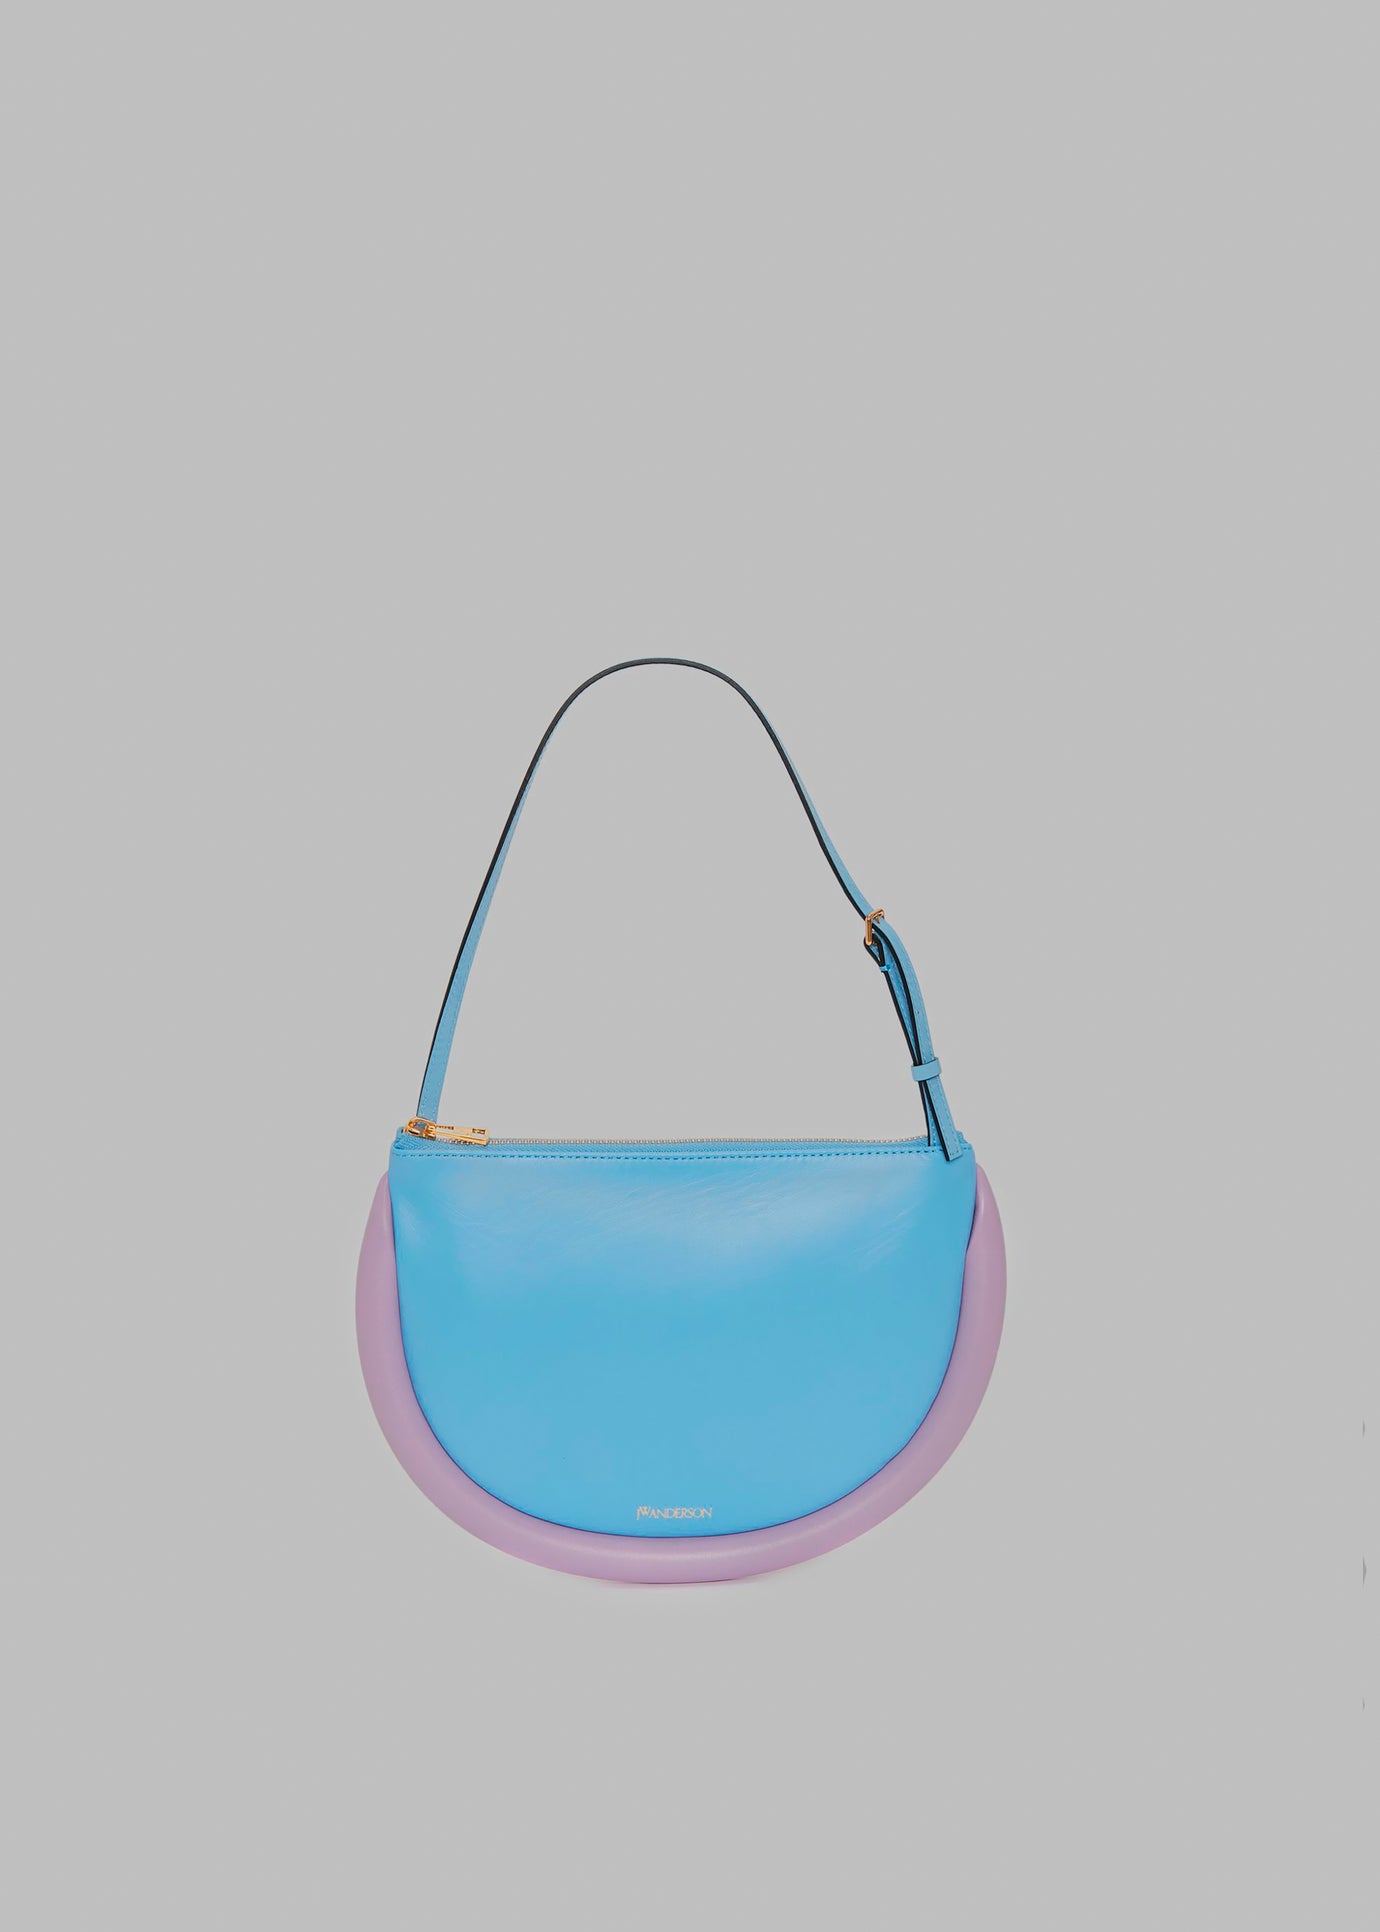 JW Anderson The Bumper Moon - Blue/Lilac - 1